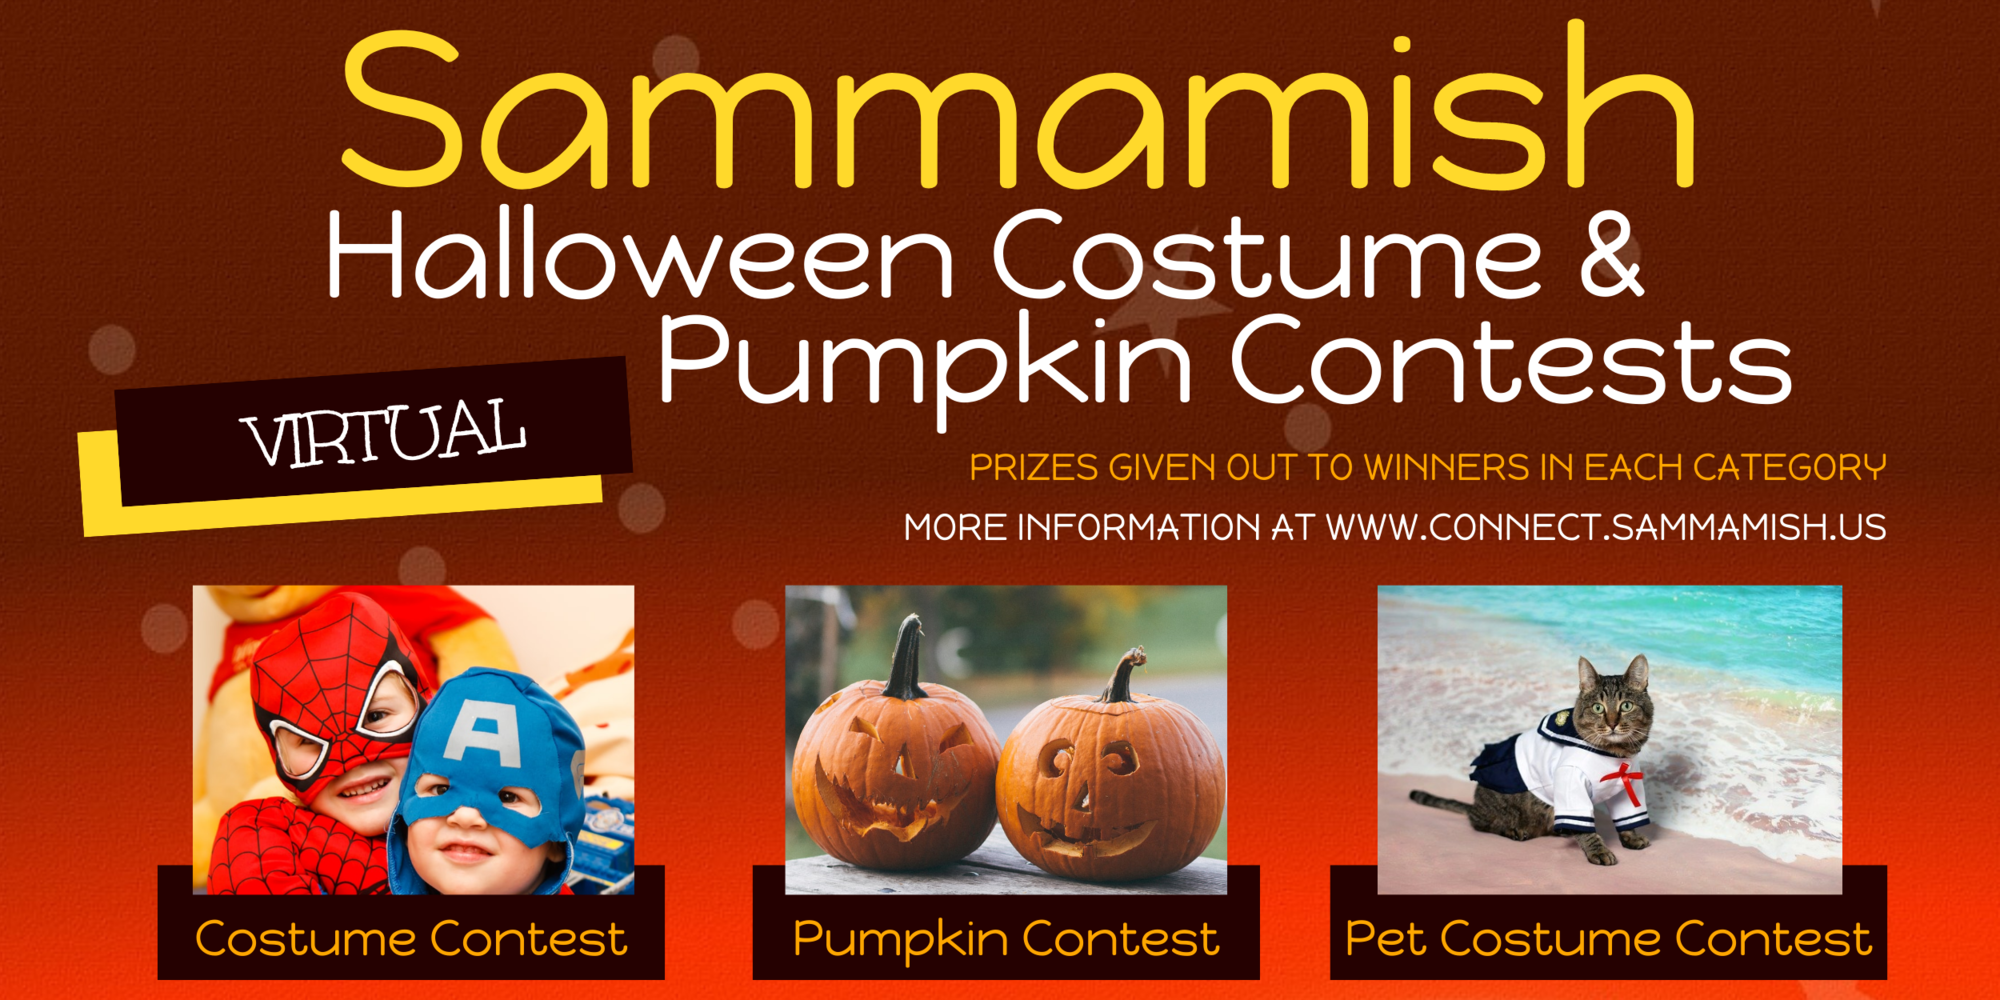 Recycling Event, Halloween Contests, and More! Sammamish Scene